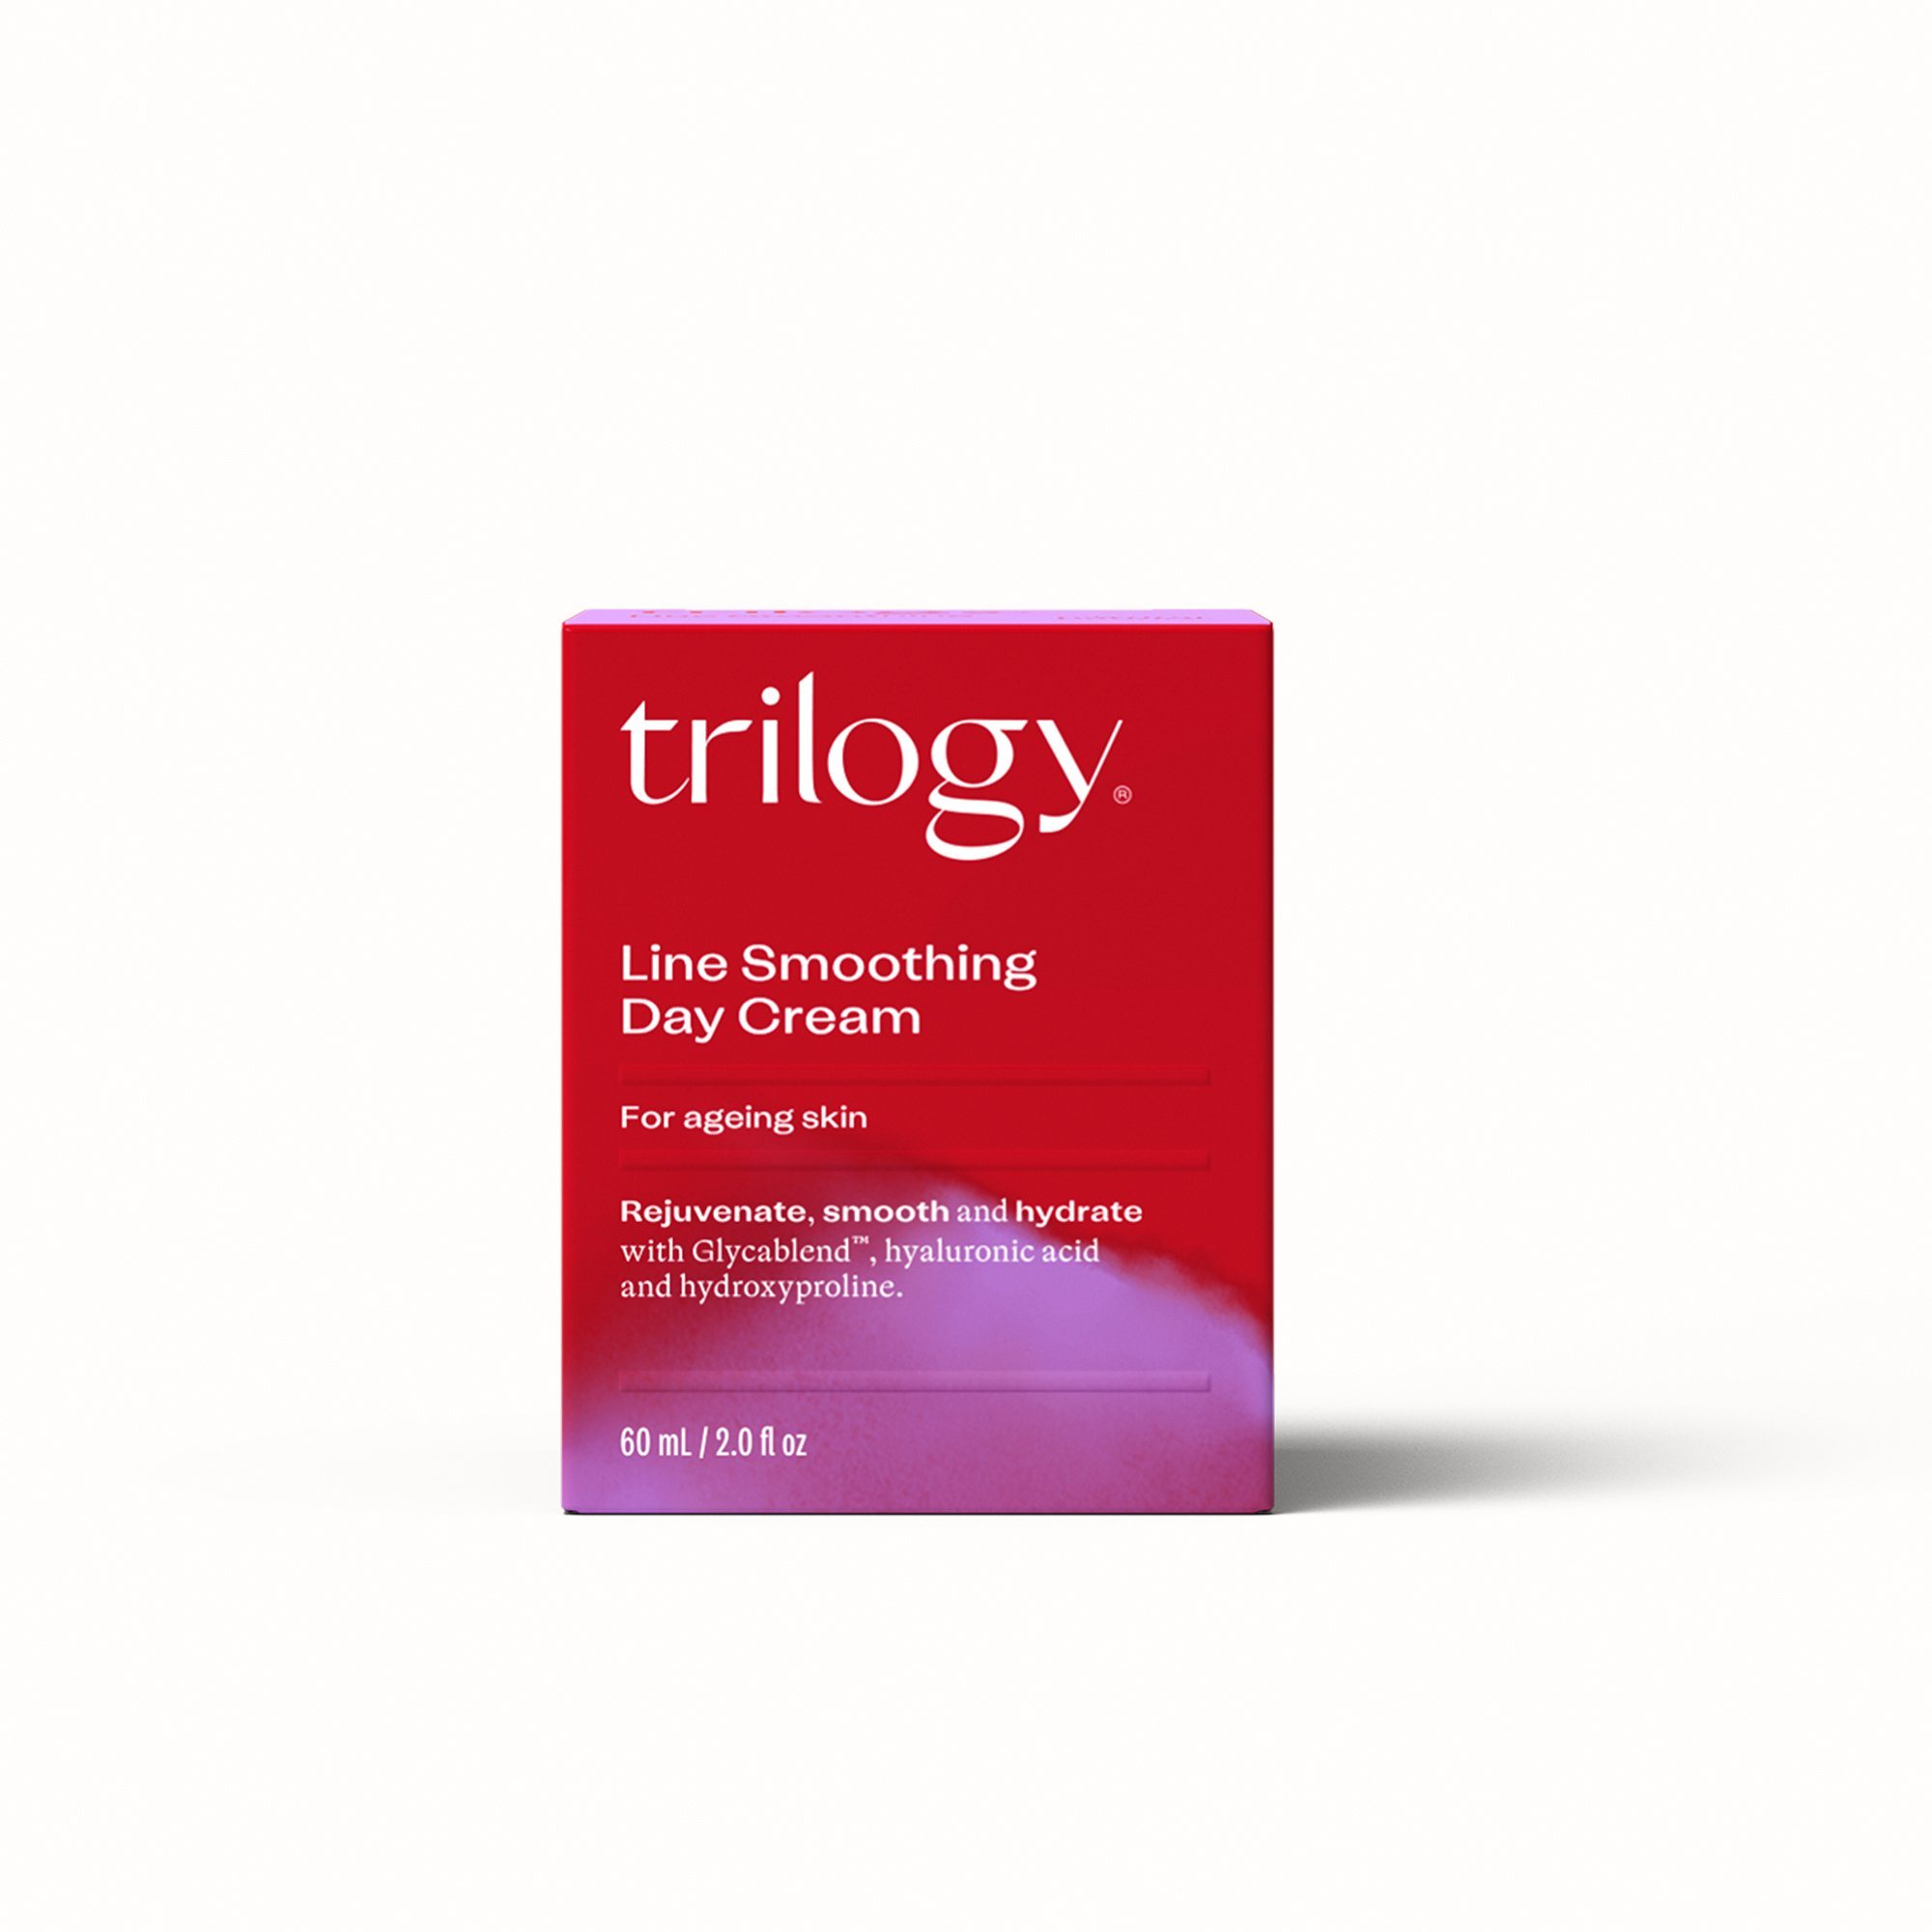 Trilogy Line Smoothing Day Cream (60ml)